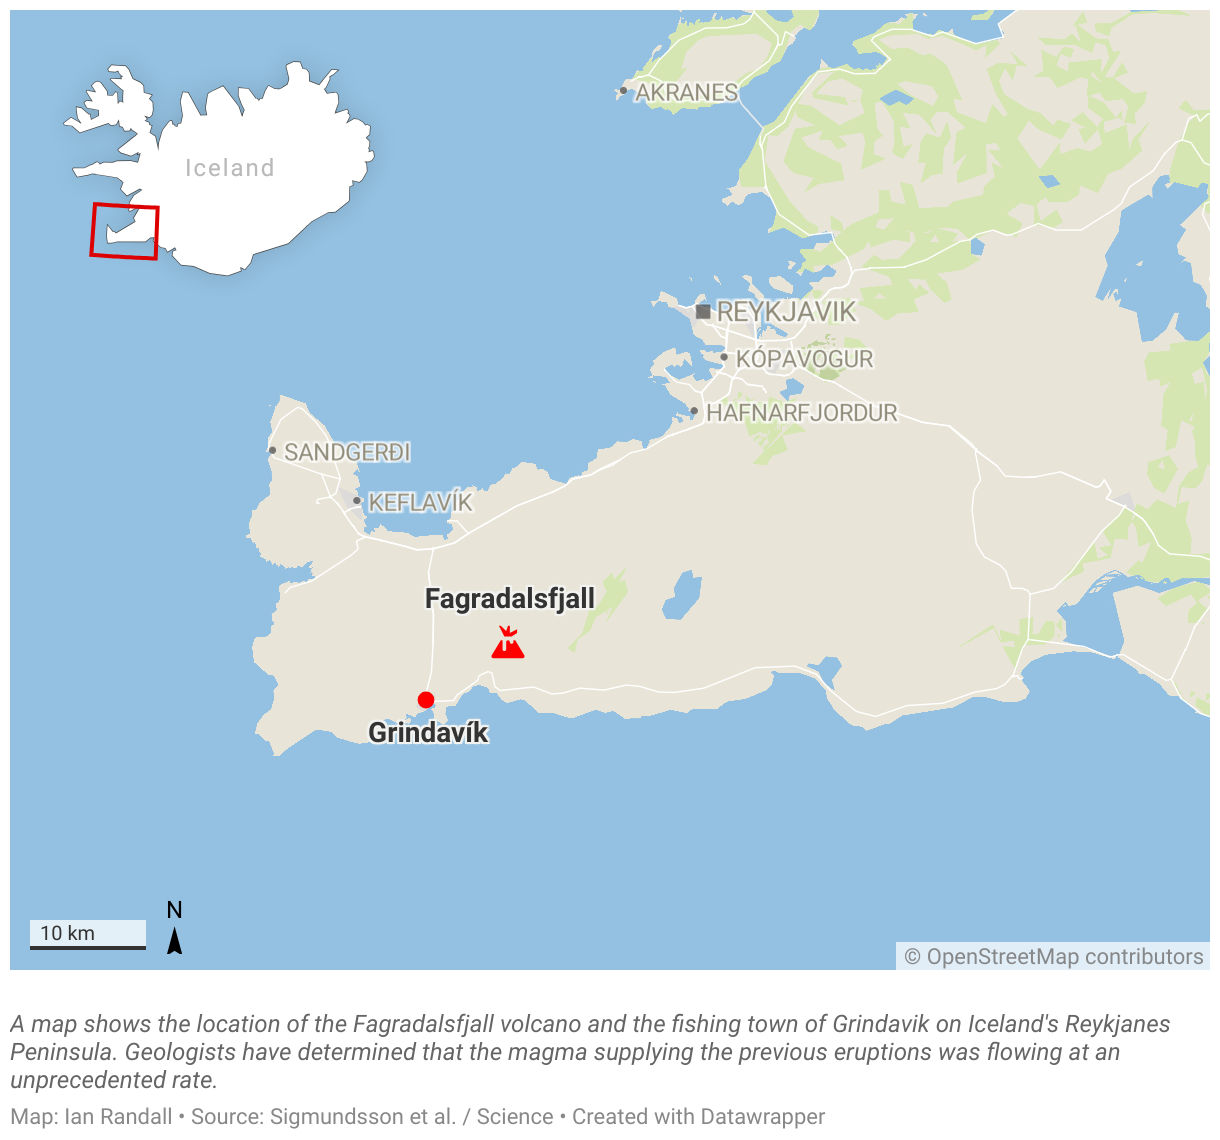 A map shows the location of the Fagradalsfjall volcano and the fishing town of Grindavik on Iceland's Reykjanes Peninsula.